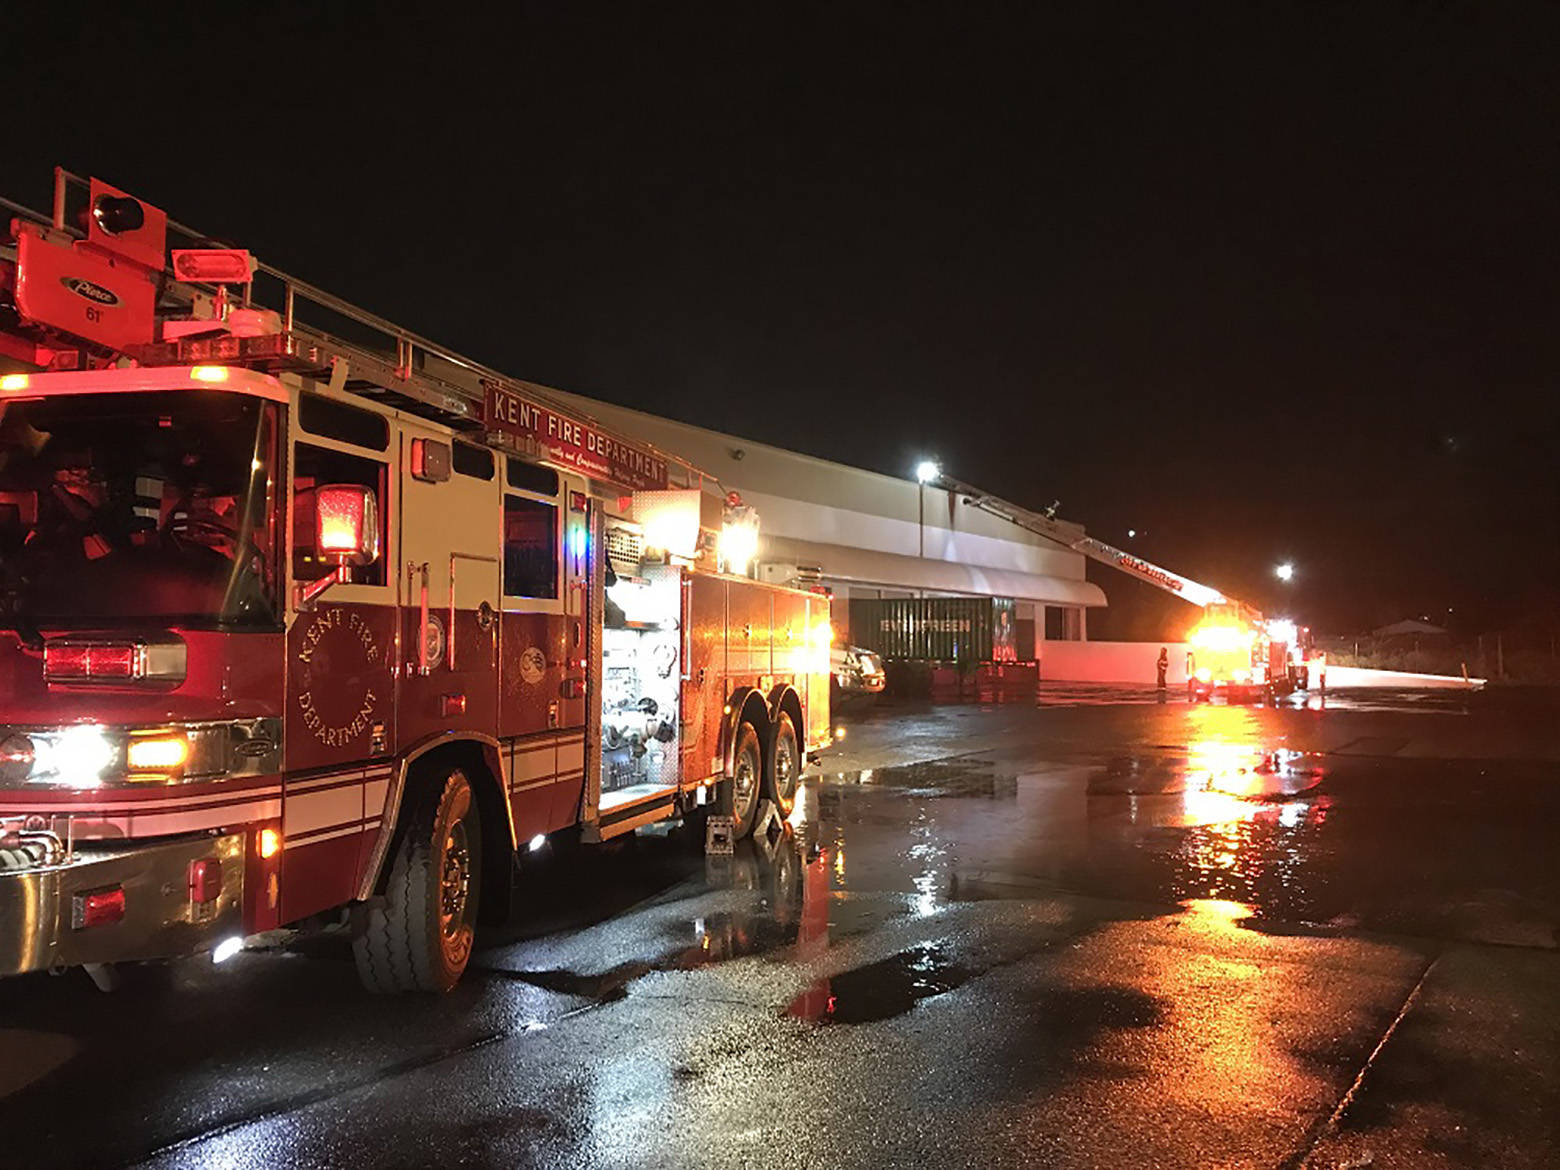 Local firefighters put out a commercial building fire in the 20100 block of 72 Ave.S., Kent, Friday night. COURTESY PHOTO, Puget Sound Regional Fire Authority